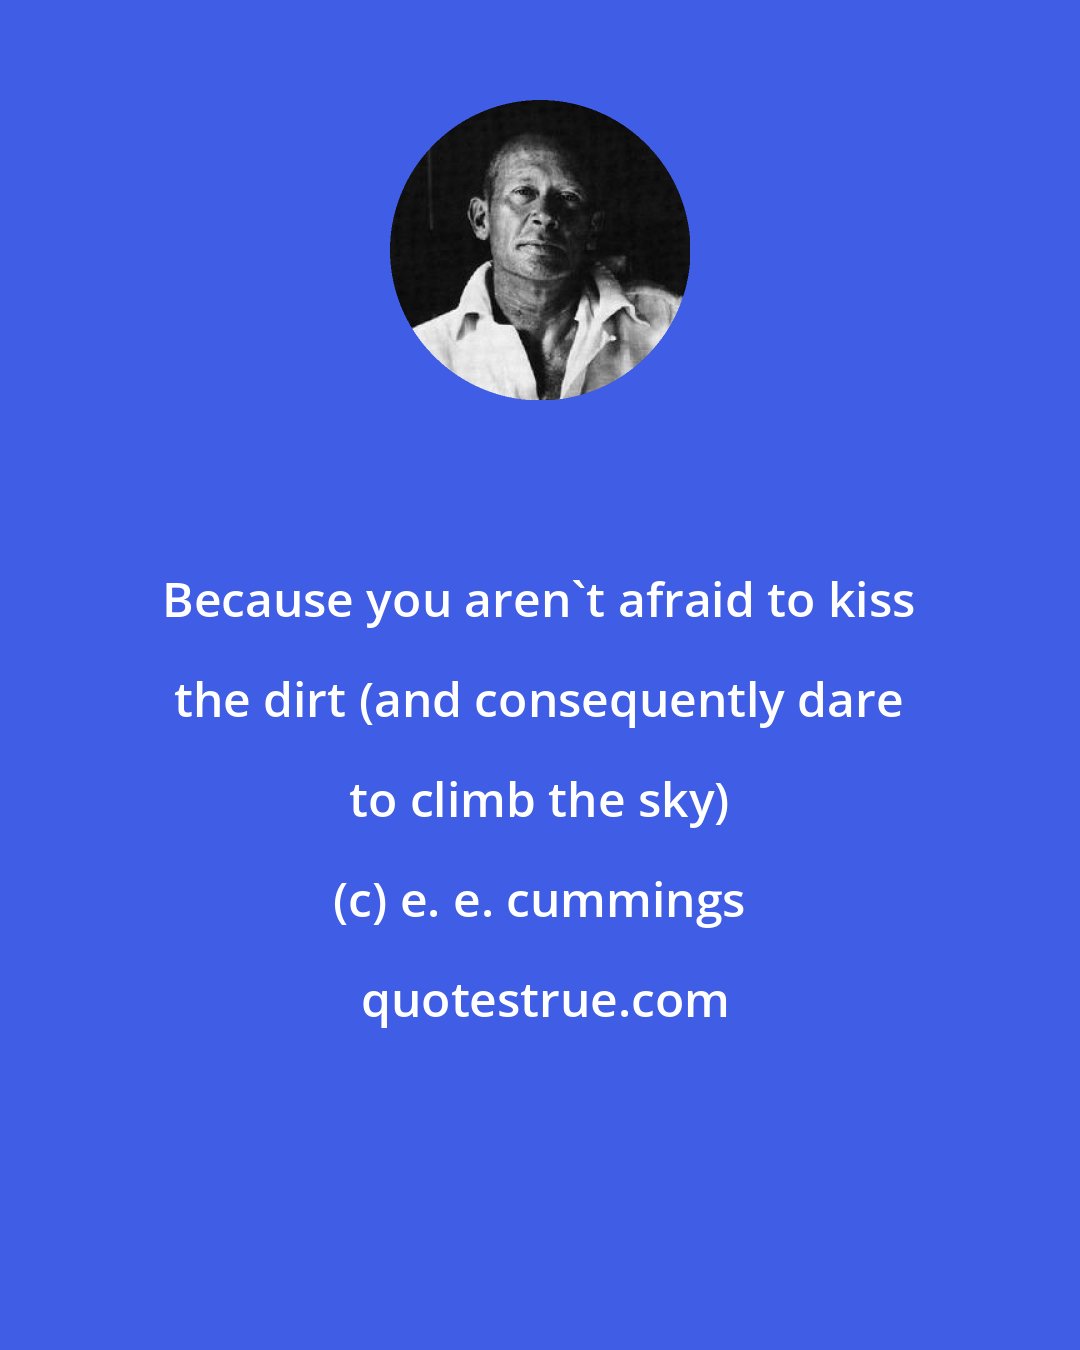 e. e. cummings: Because you aren't afraid to kiss the dirt (and consequently dare to climb the sky)